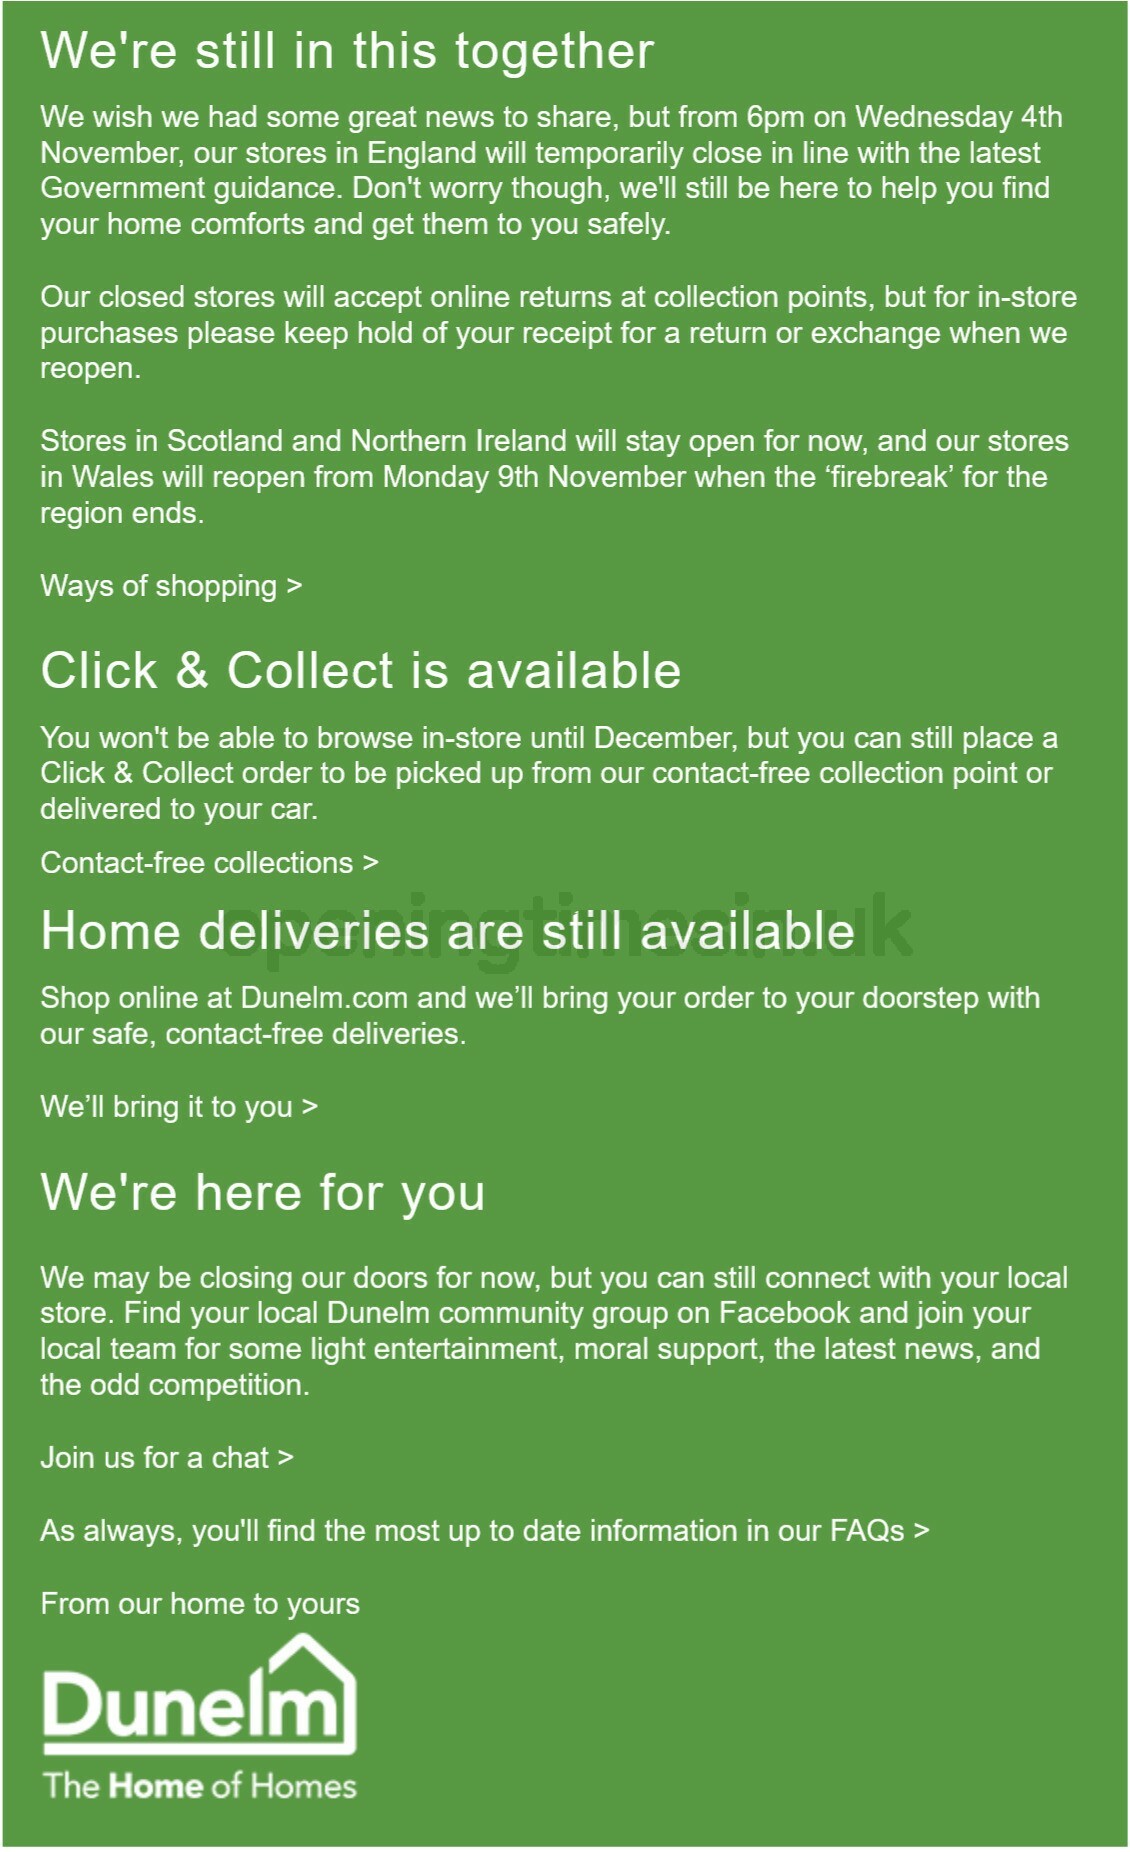 Dunelm Temporary store closures in England Offers from 4 November